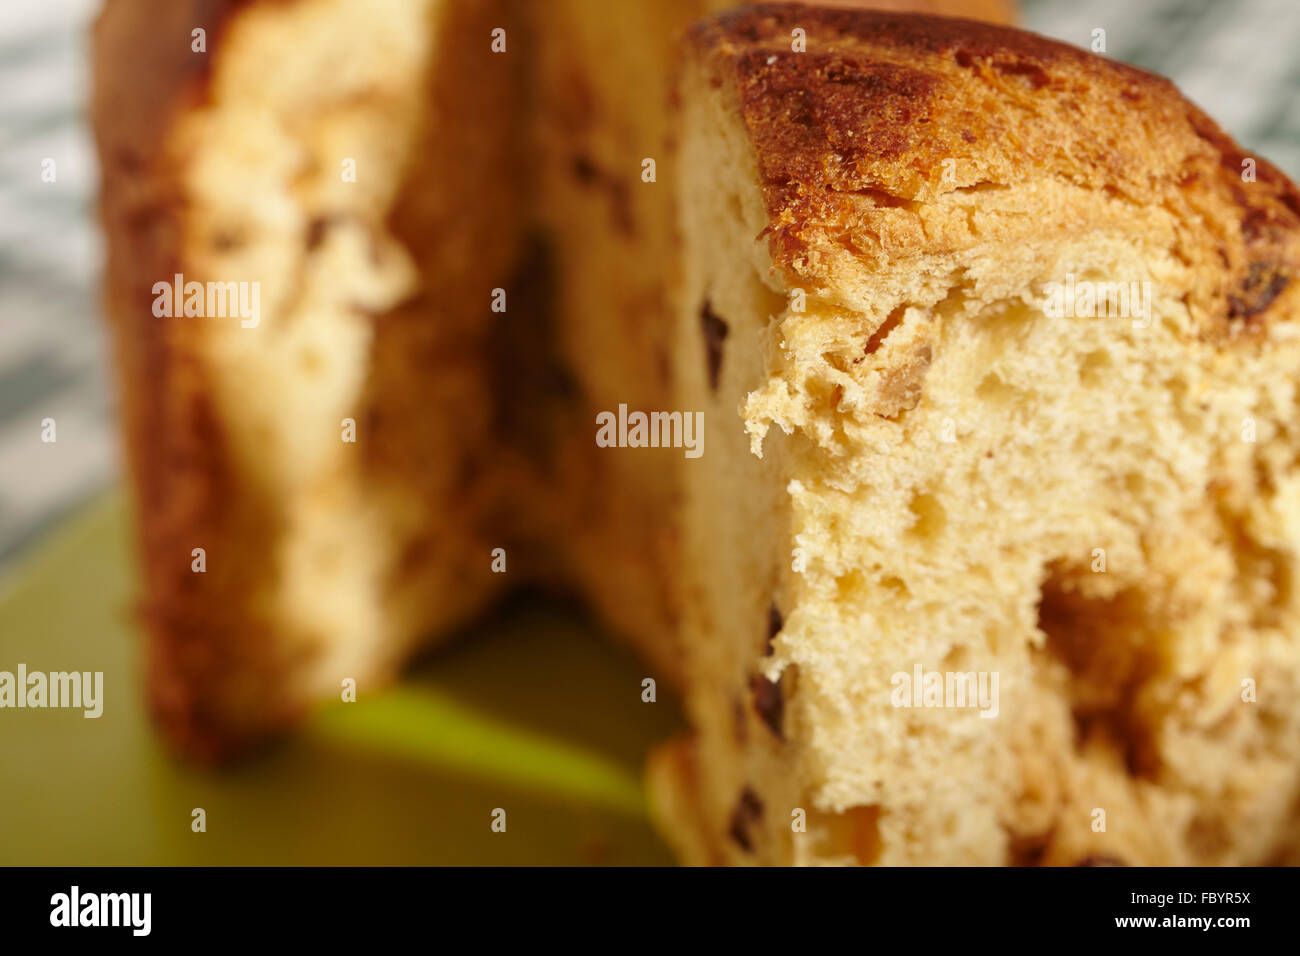 Slices of panettone, the Italian holiday sweet bread Stock Photo